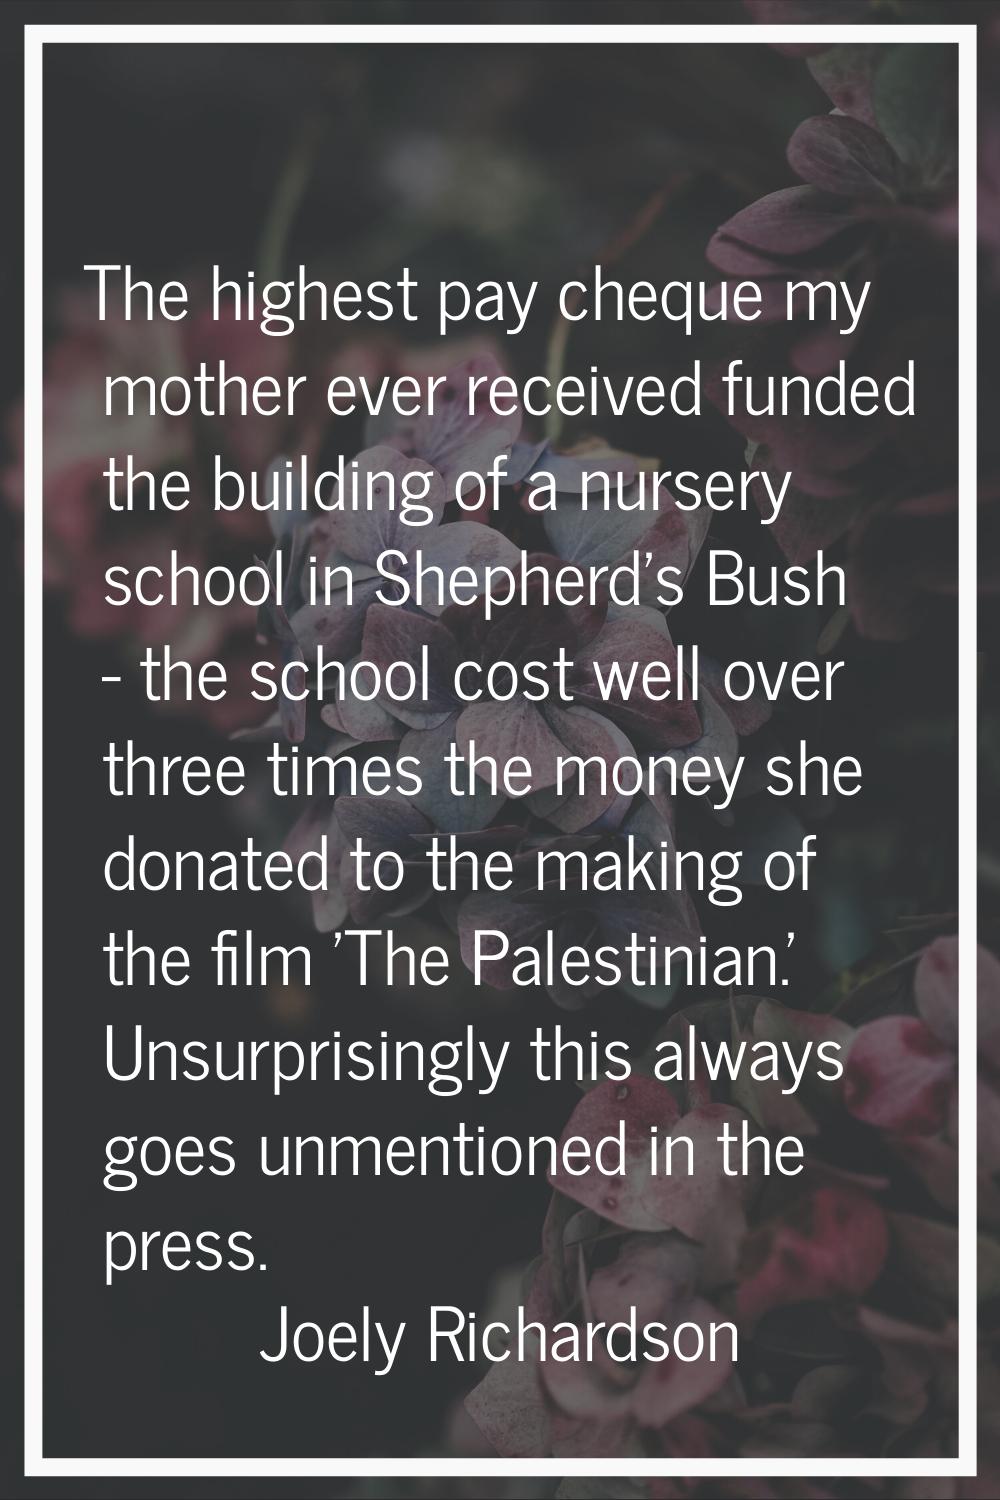 The highest pay cheque my mother ever received funded the building of a nursery school in Shepherd'